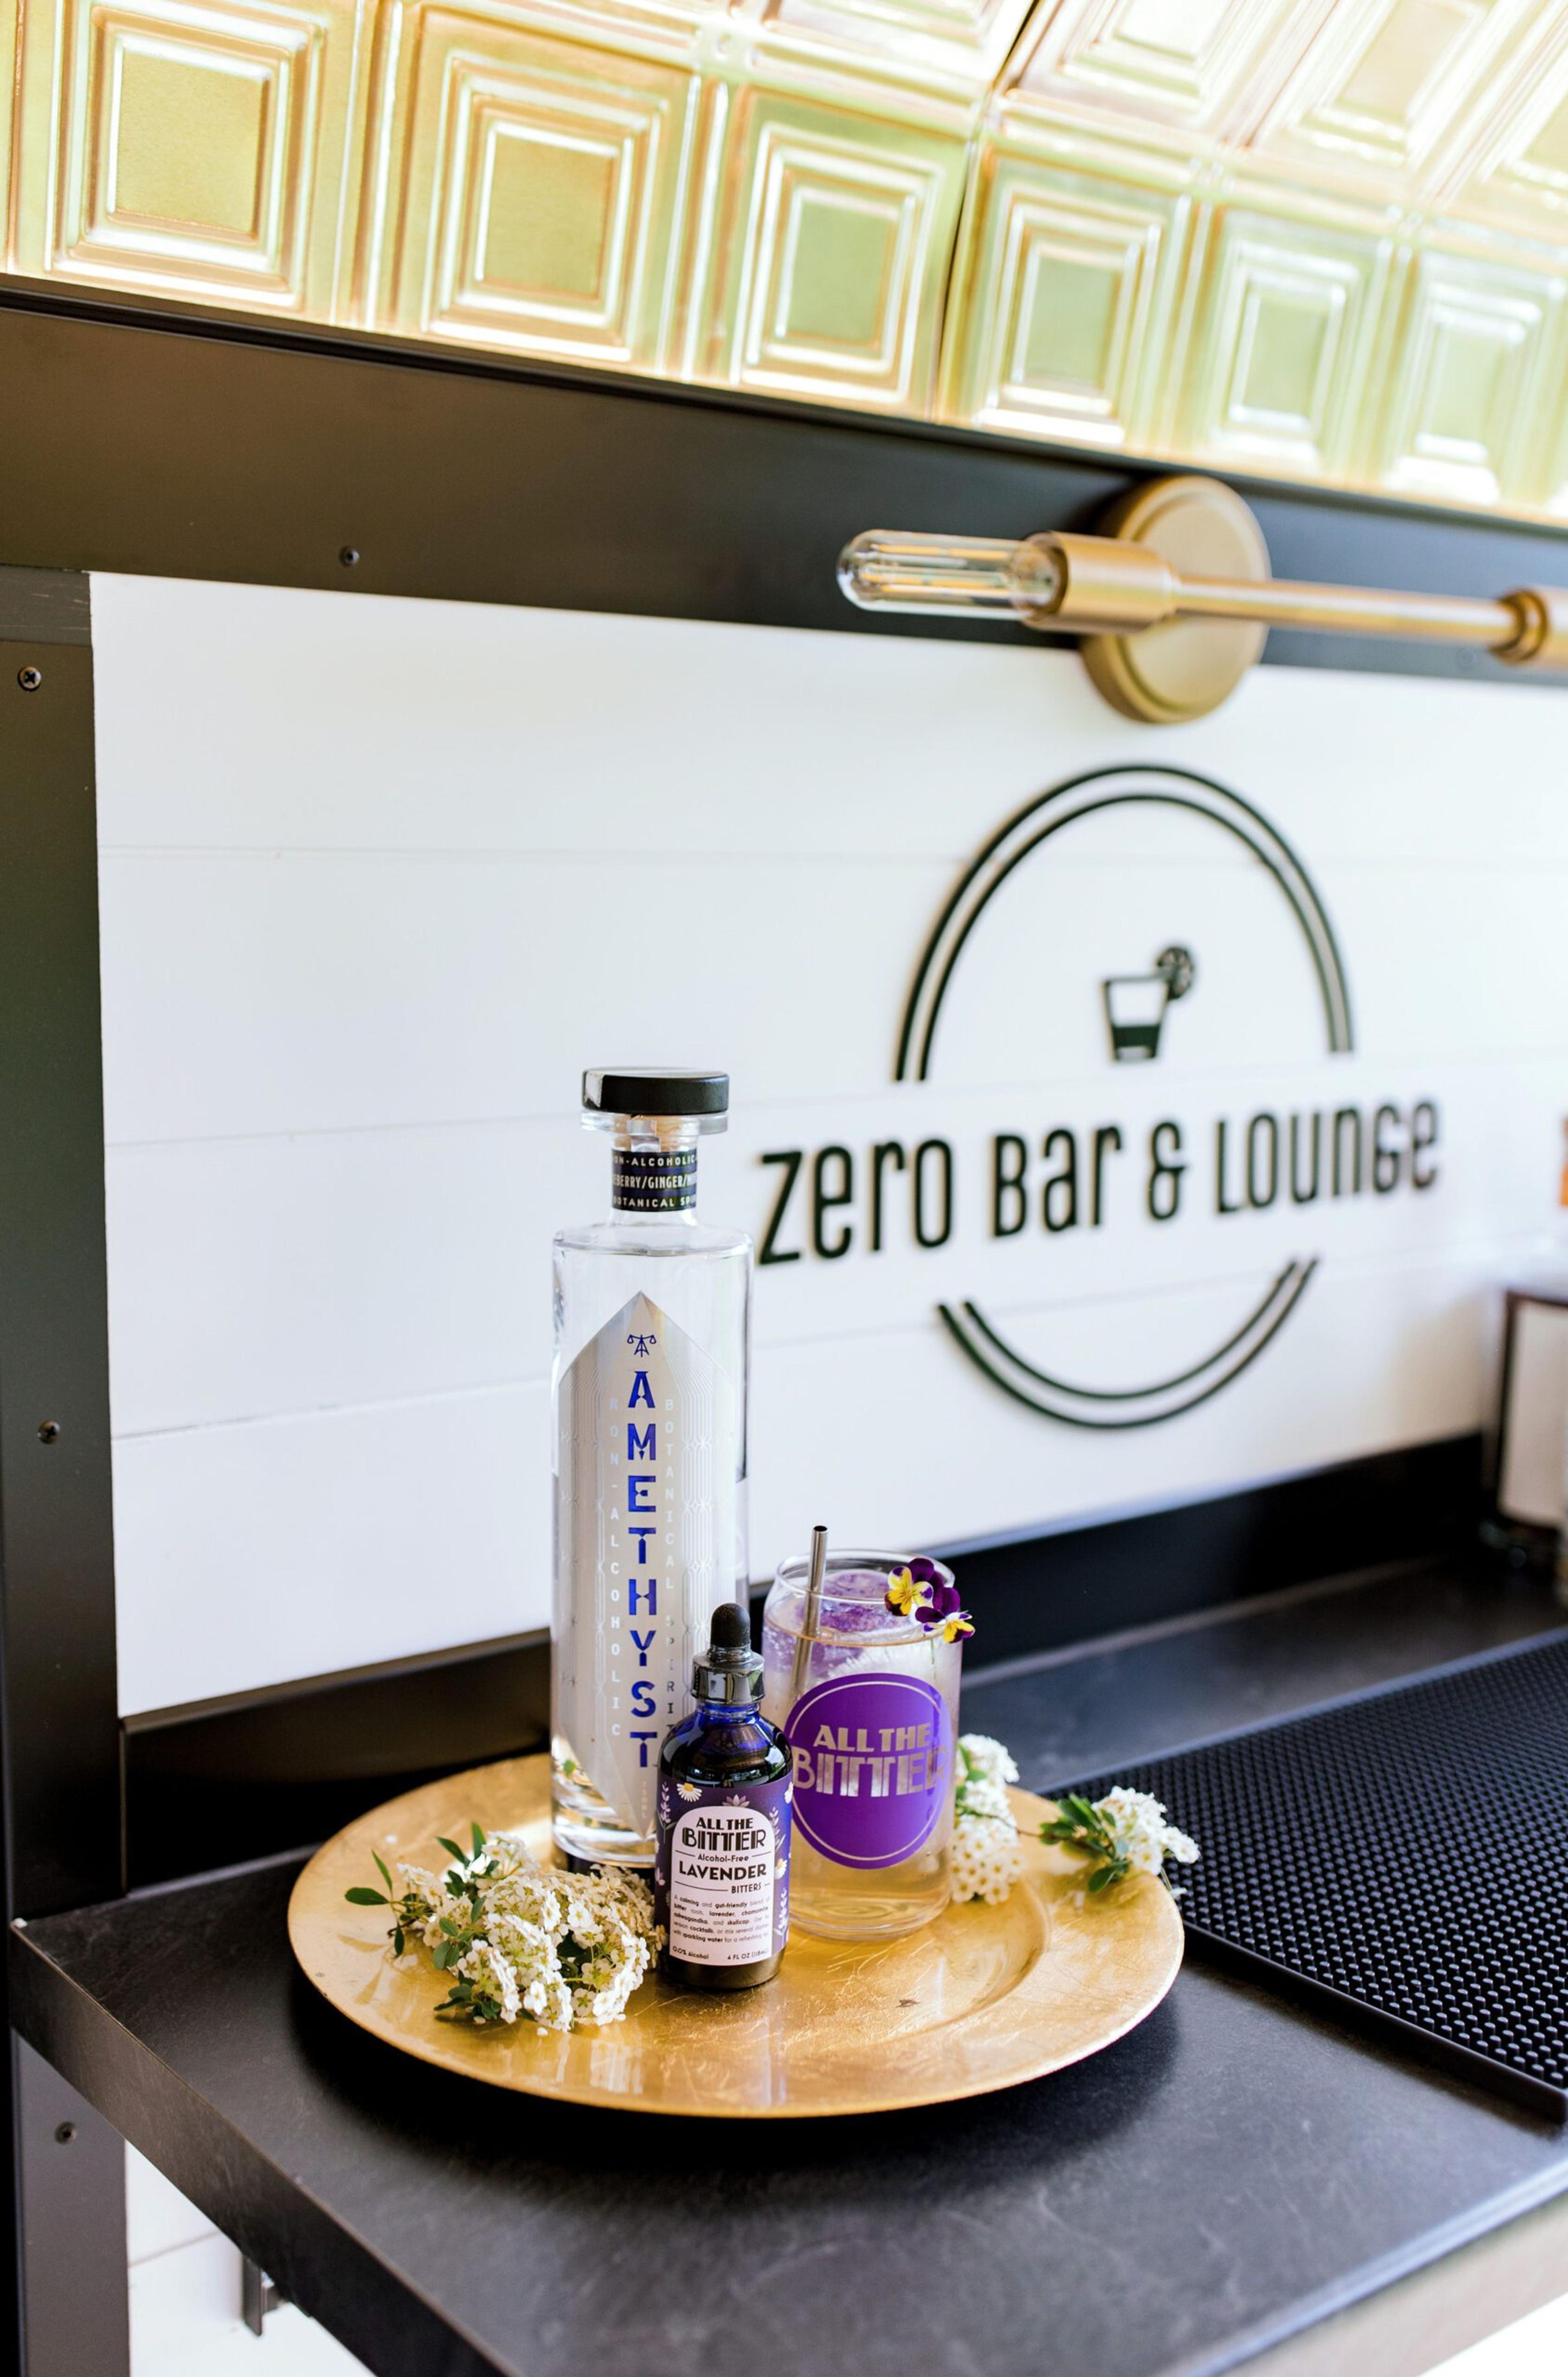 Spirits and bitters used at Zero Bar & Lounge are photographed in front of the company trailer.